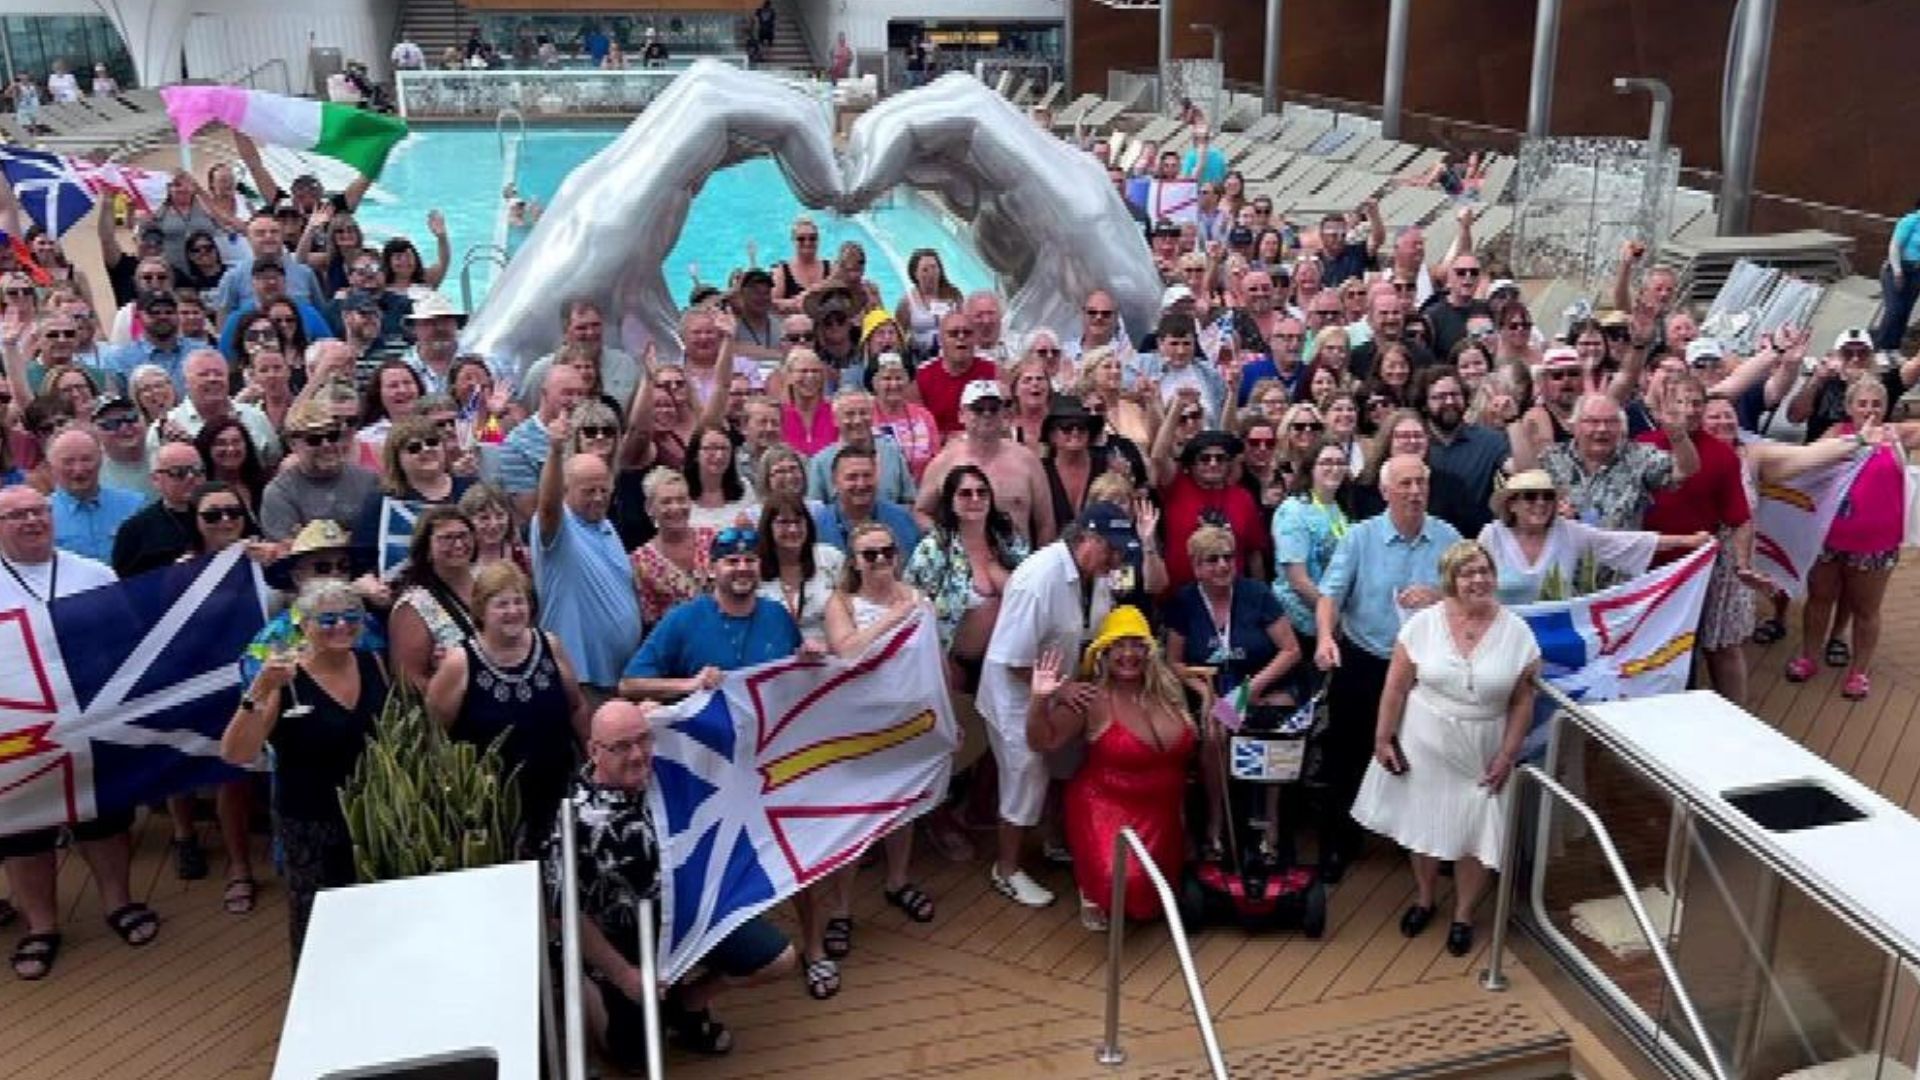 Over 500 Newfoundlanders end up on a cruise together and we are LOVING it